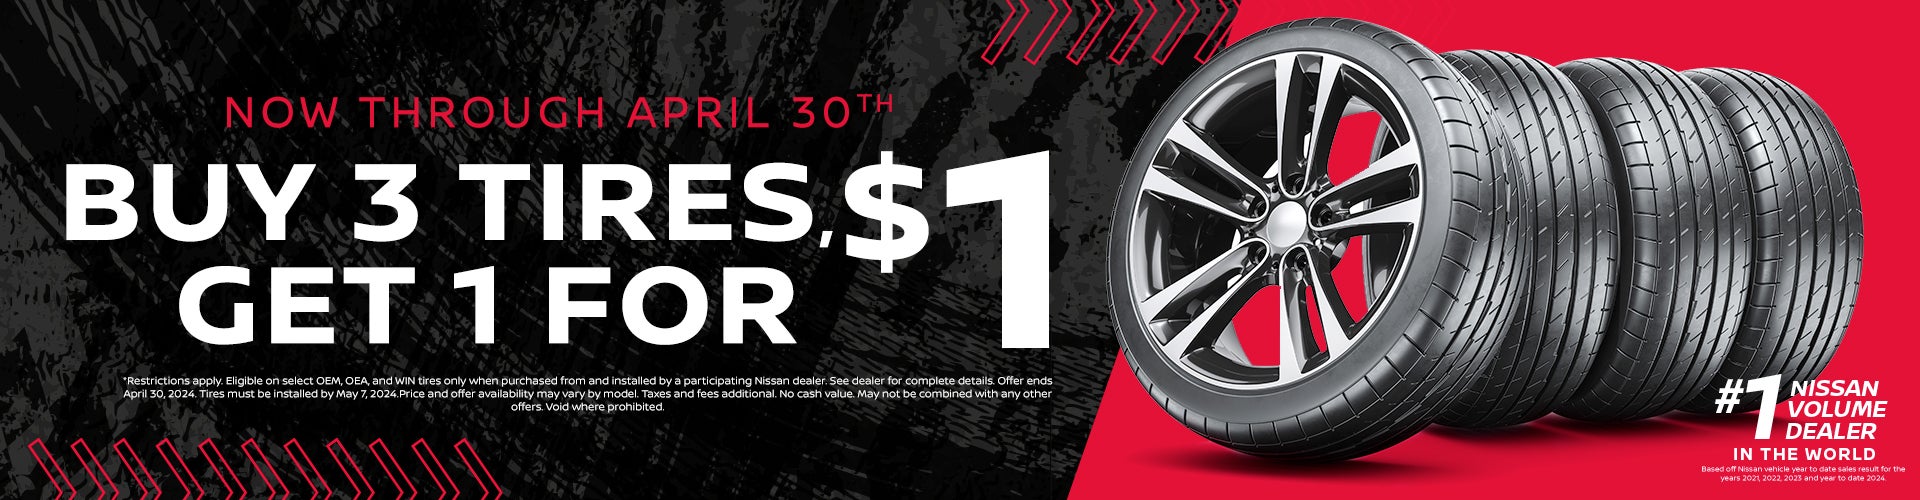 Buy 3 Tires, Get 1 for $1 